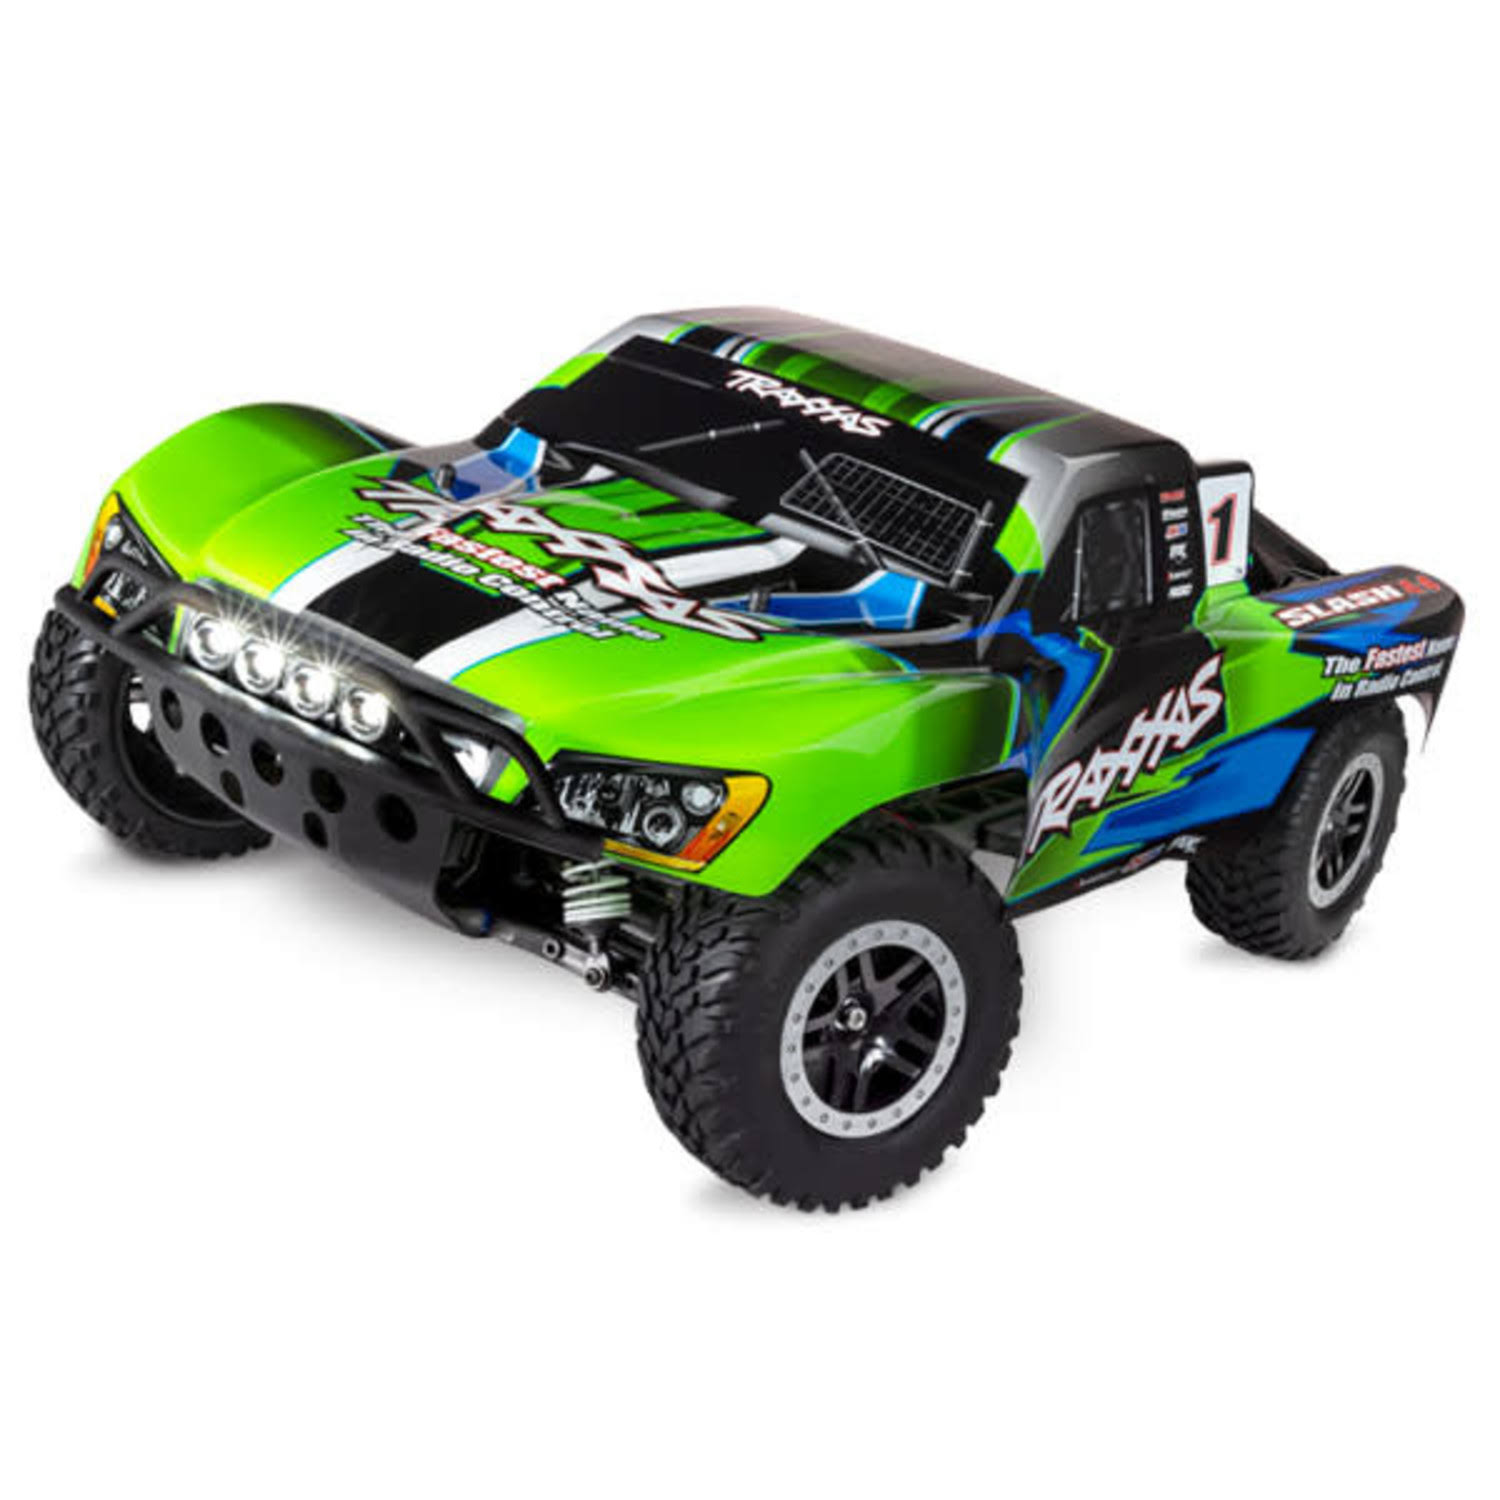 Traxxas Slash 4x4 RTR 4WD Brushed Short Course Truck (Green) w/LED Lights 68054-61GRN